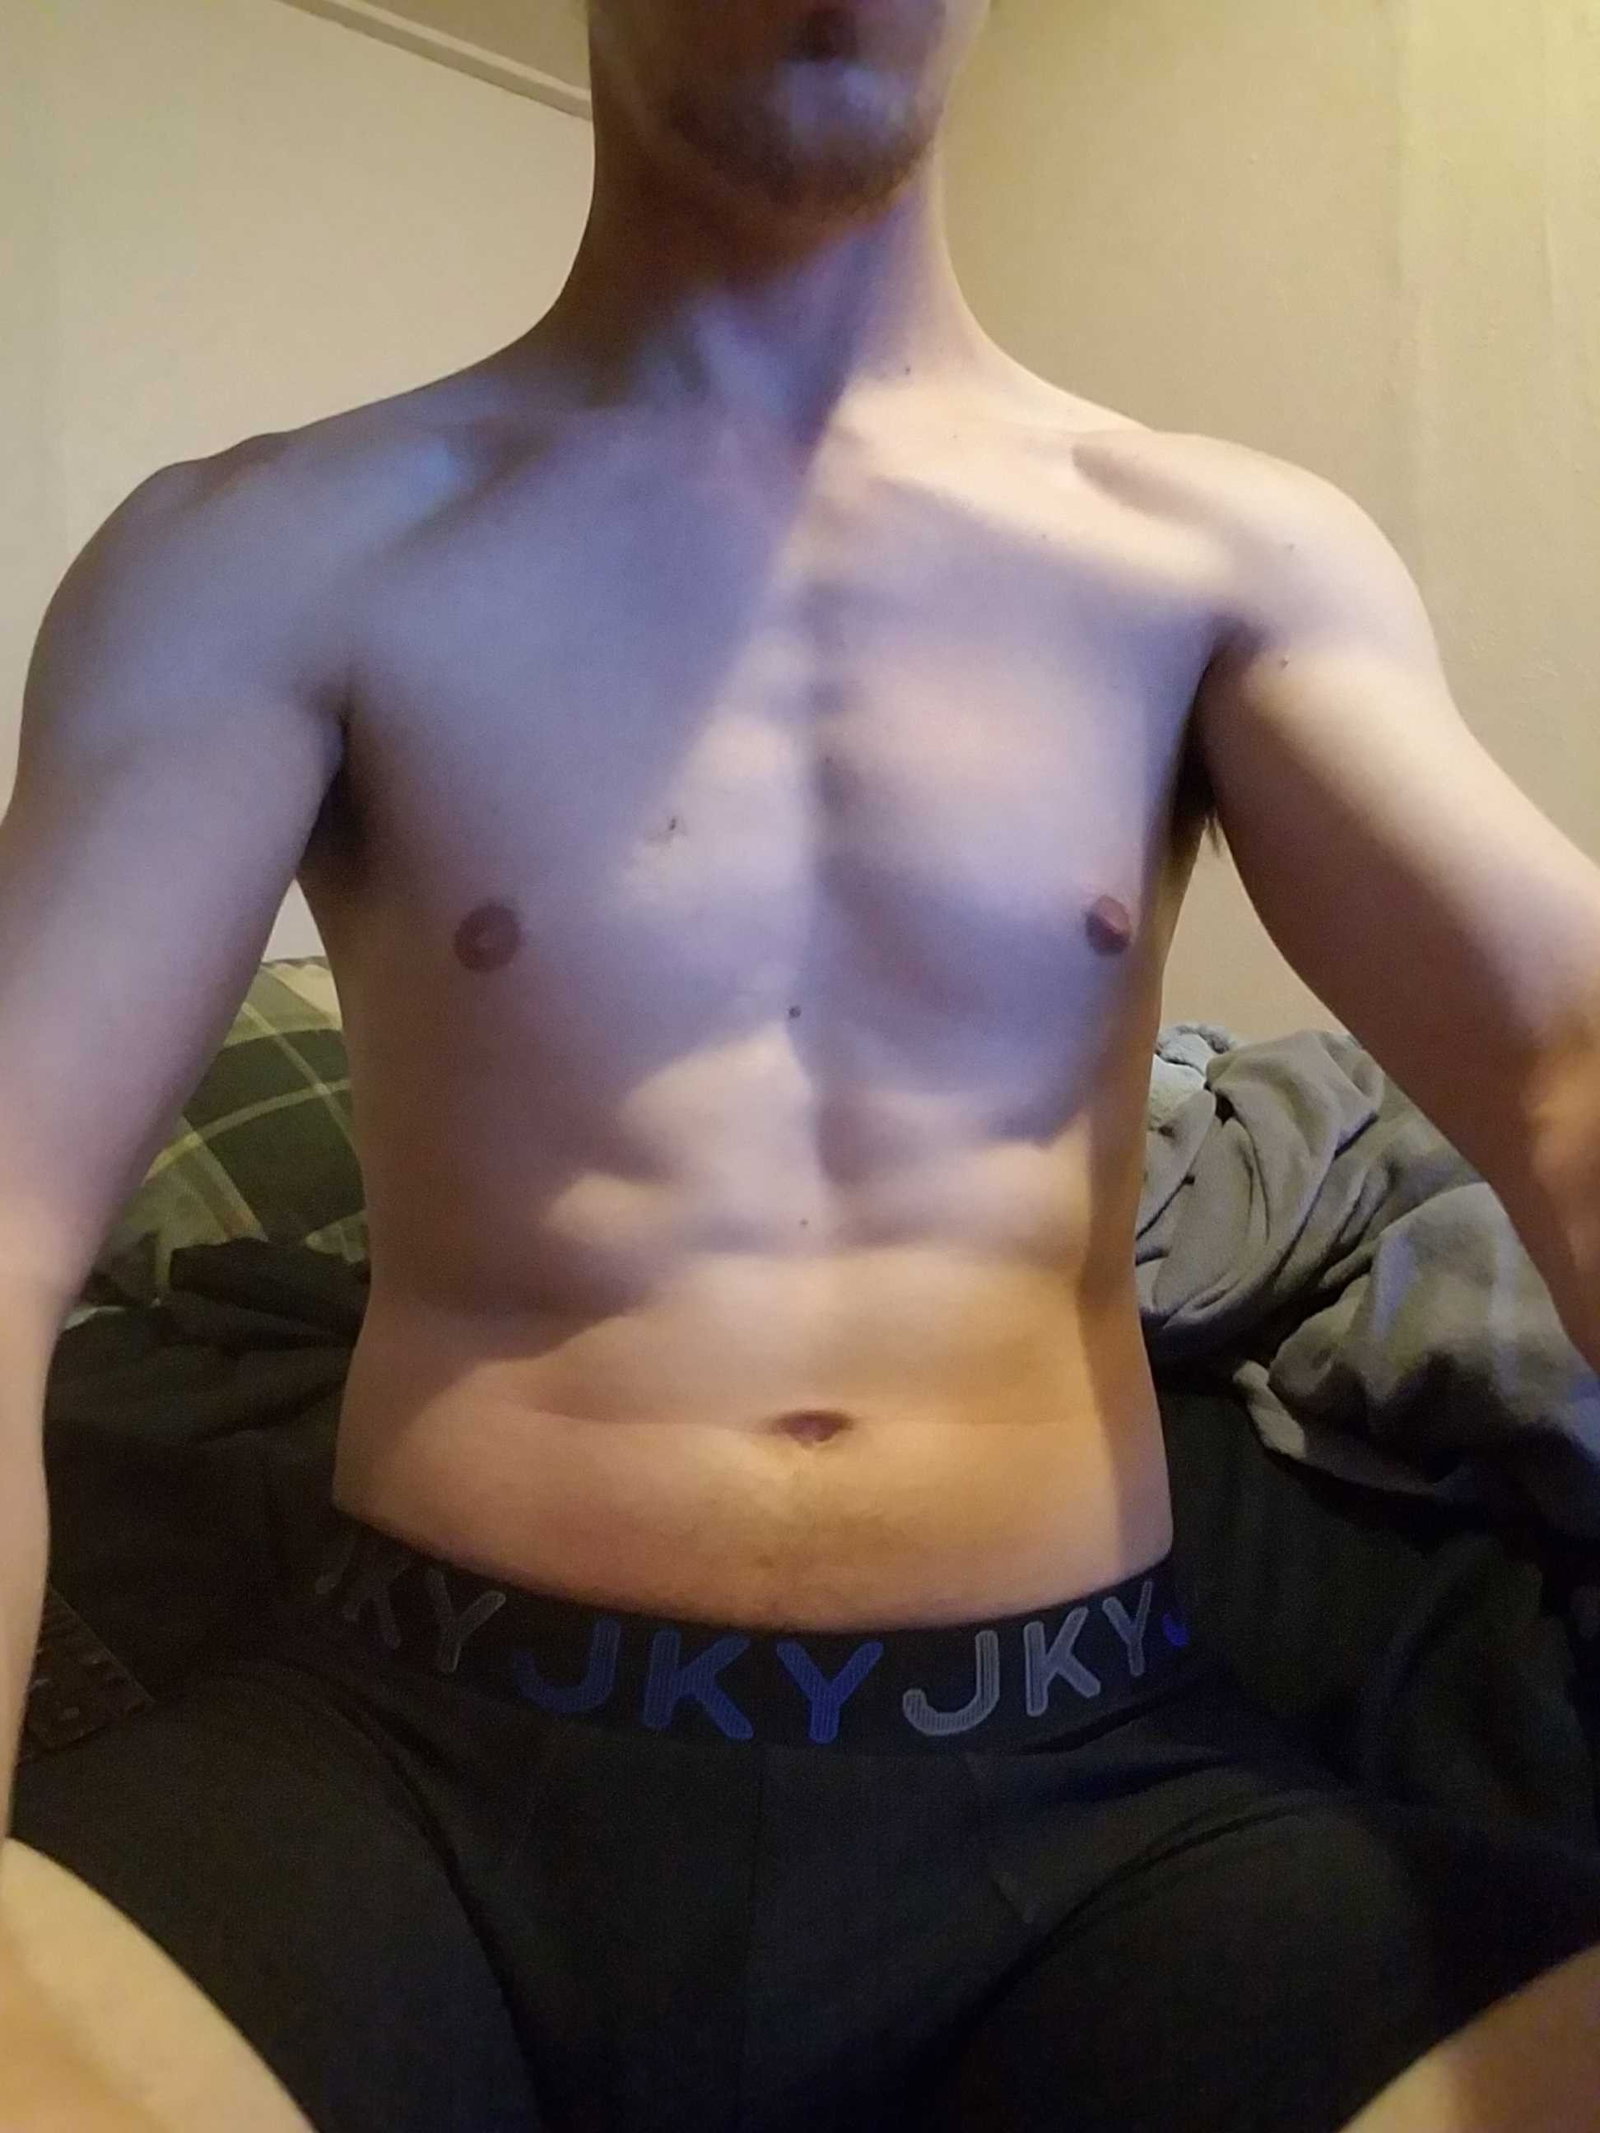 Watch the Photo by midwest22323 with the username @midwest22323, who is a verified user, posted on August 2, 2018 and the text says 'Black JKY boxer briefs'